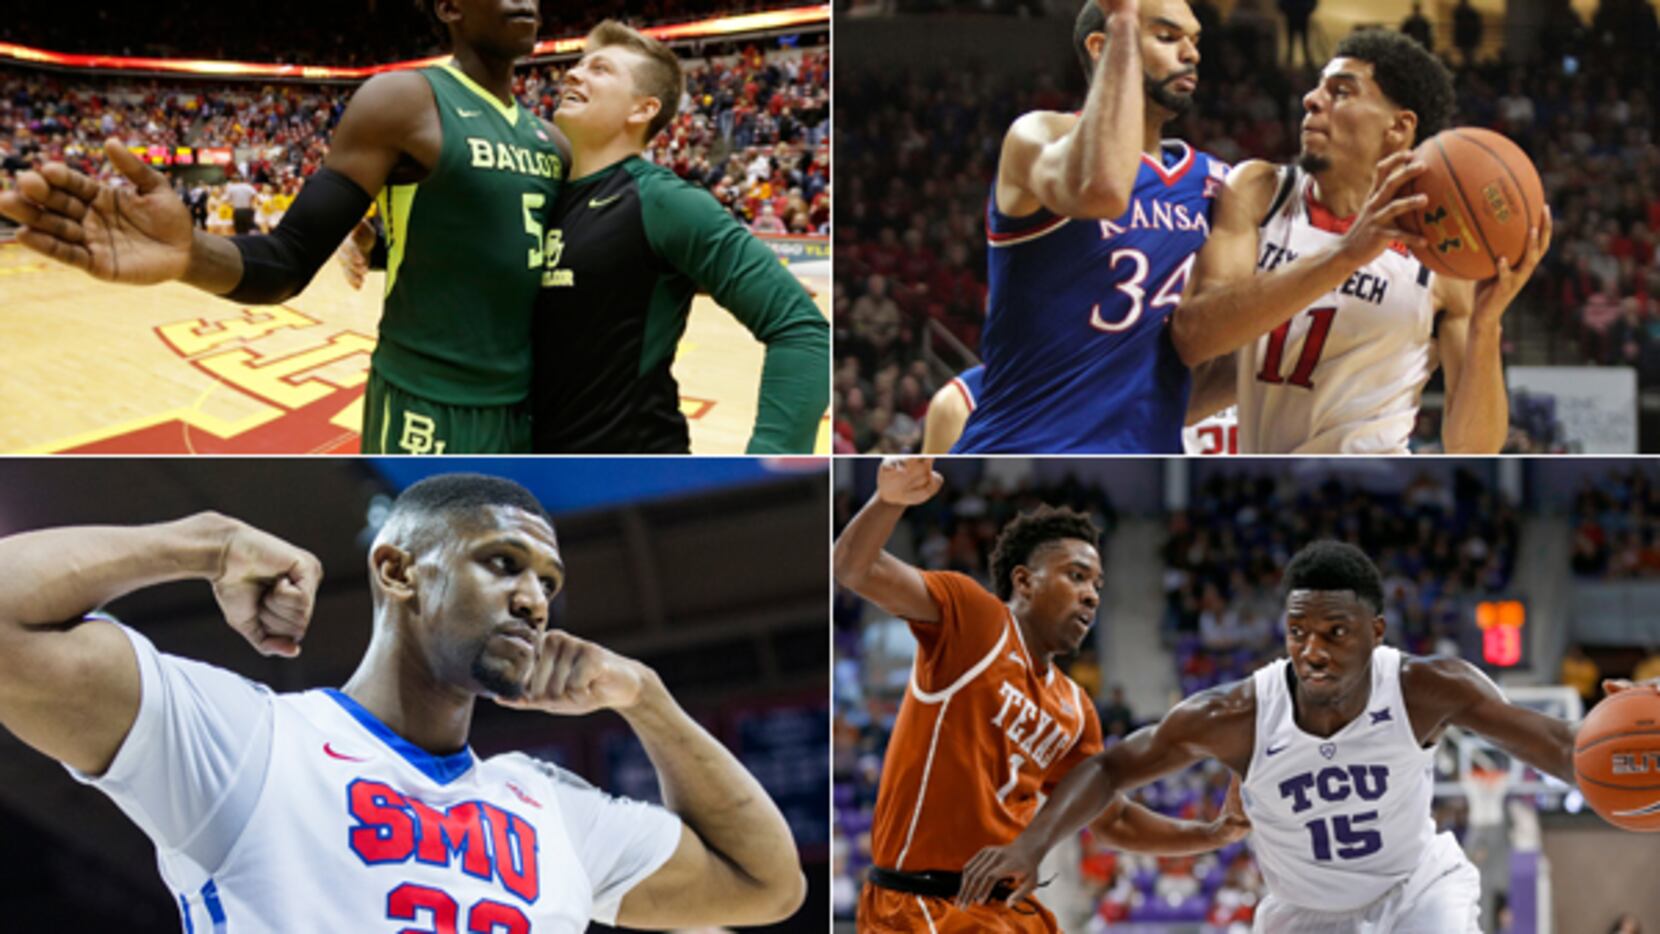 SMU and Texas A&M are the undoubted best in Texas, but how are others being viewed in our poll?